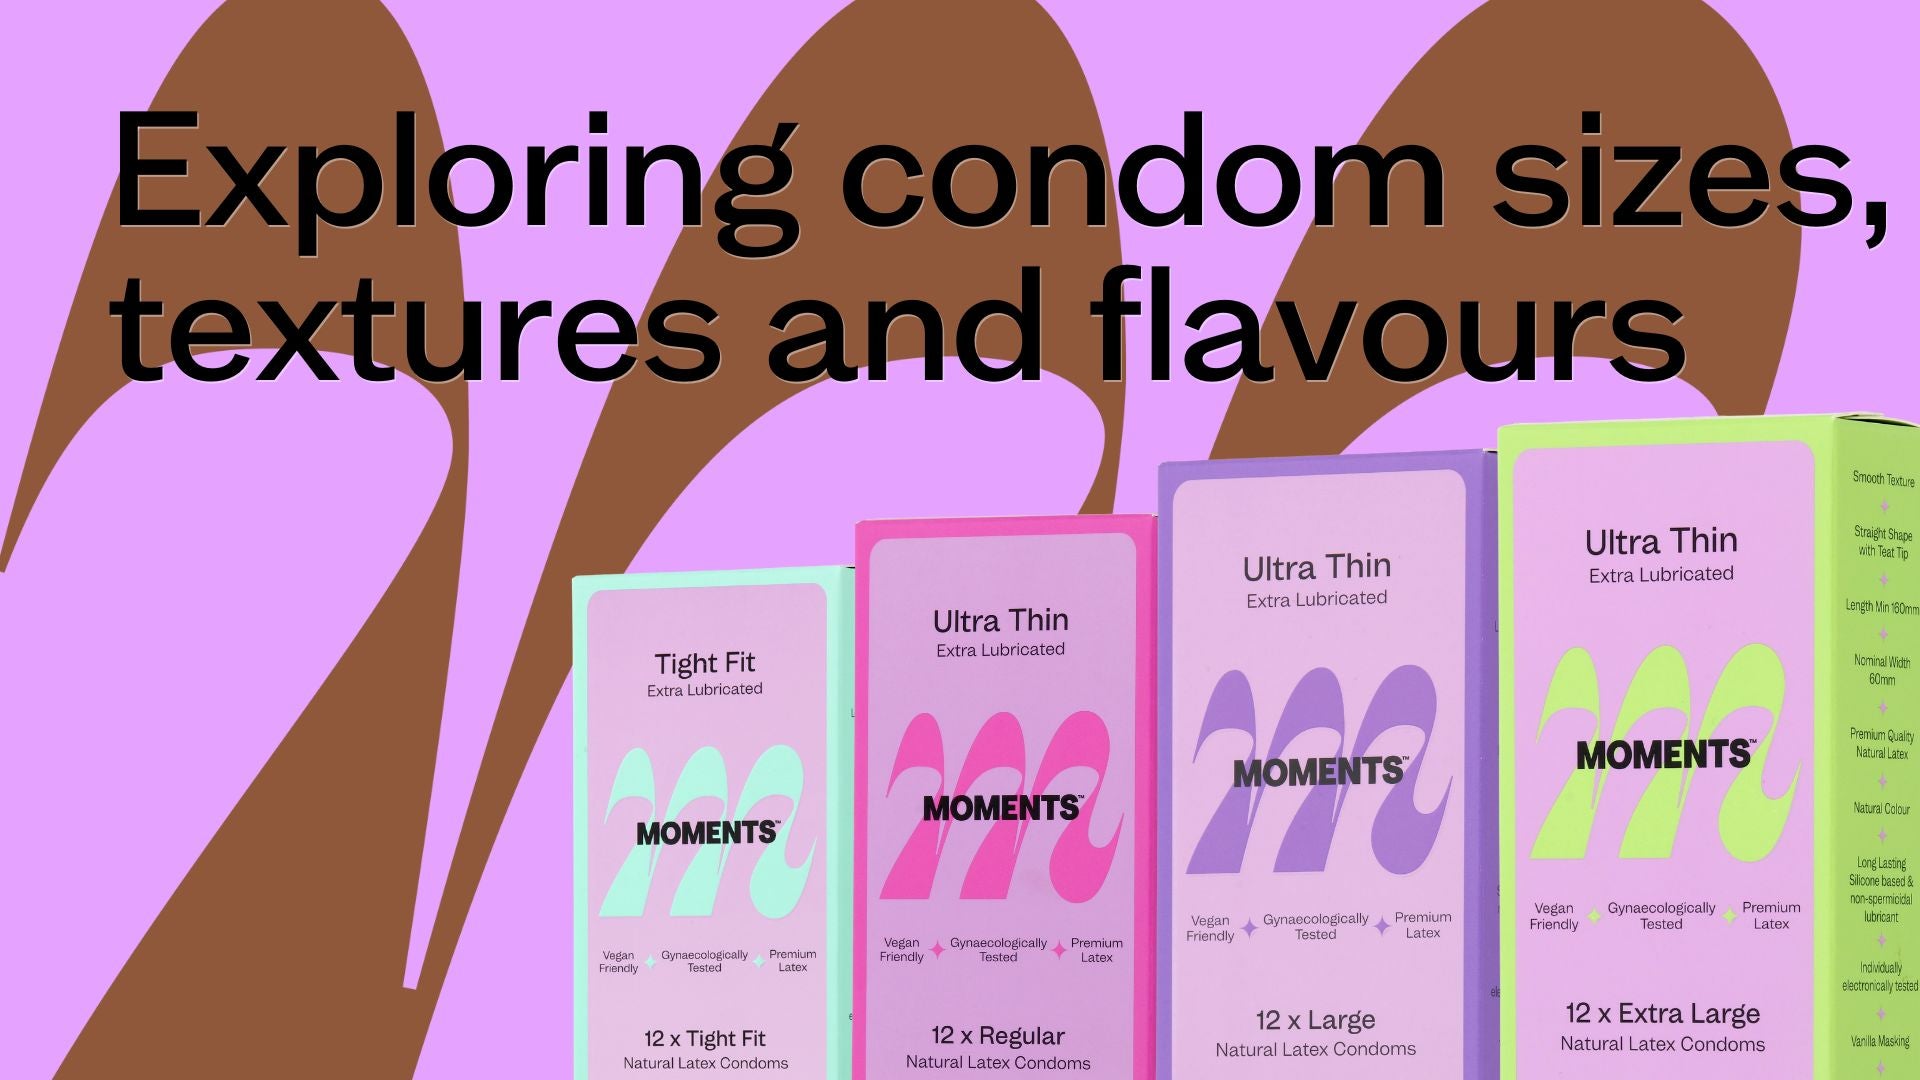 Exploring Condom Sizes, Textures, and Flavours